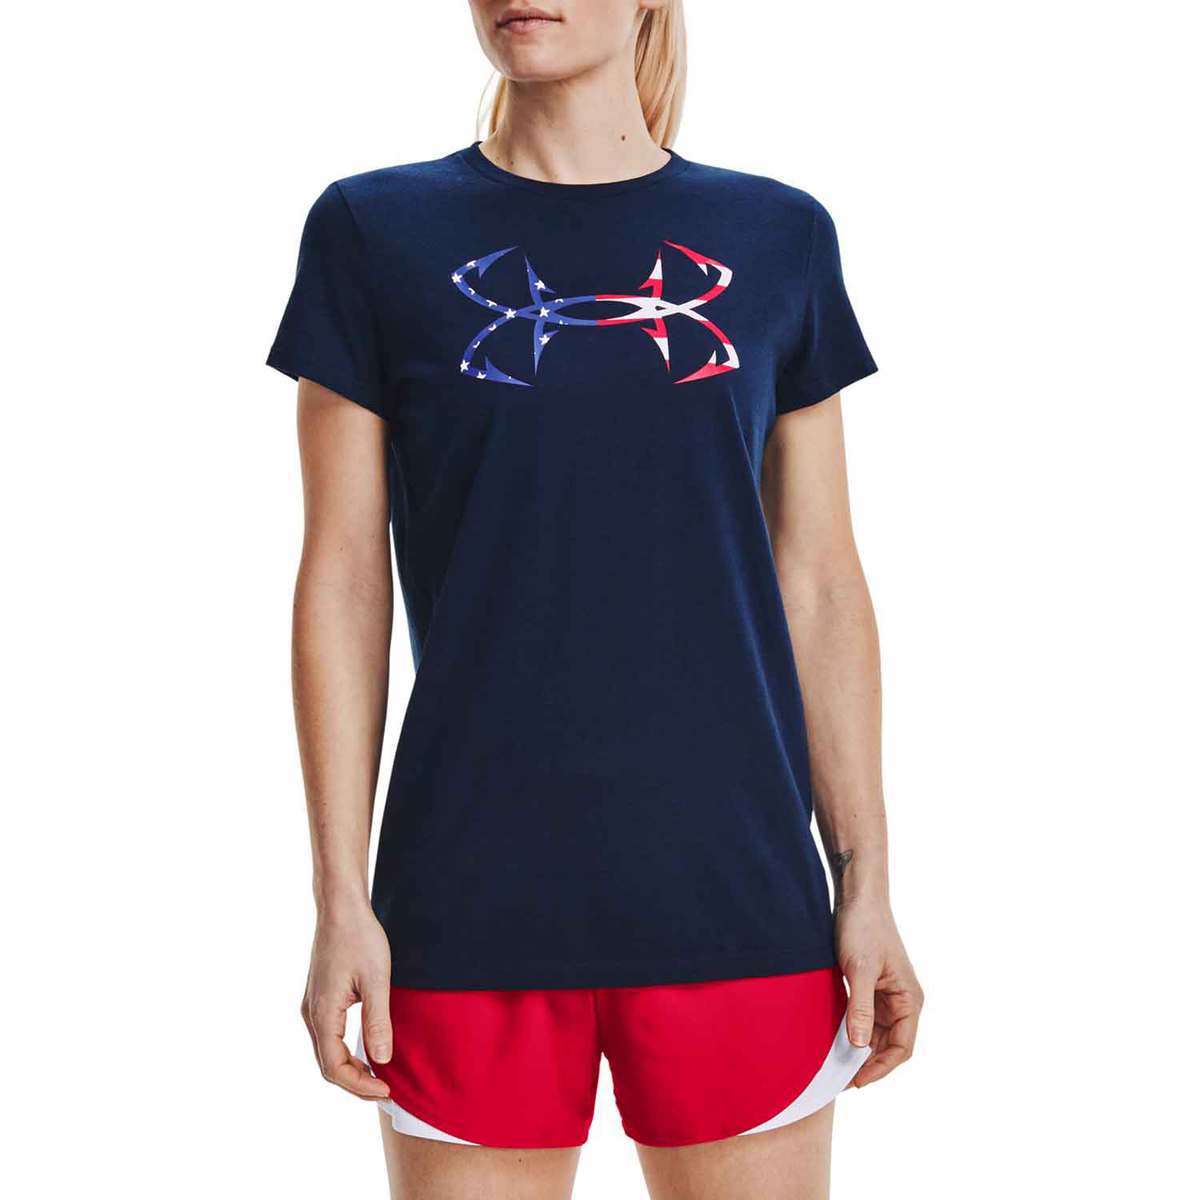 Under Armour Freedom Hook Women's T-Shirt - Academy / White - L